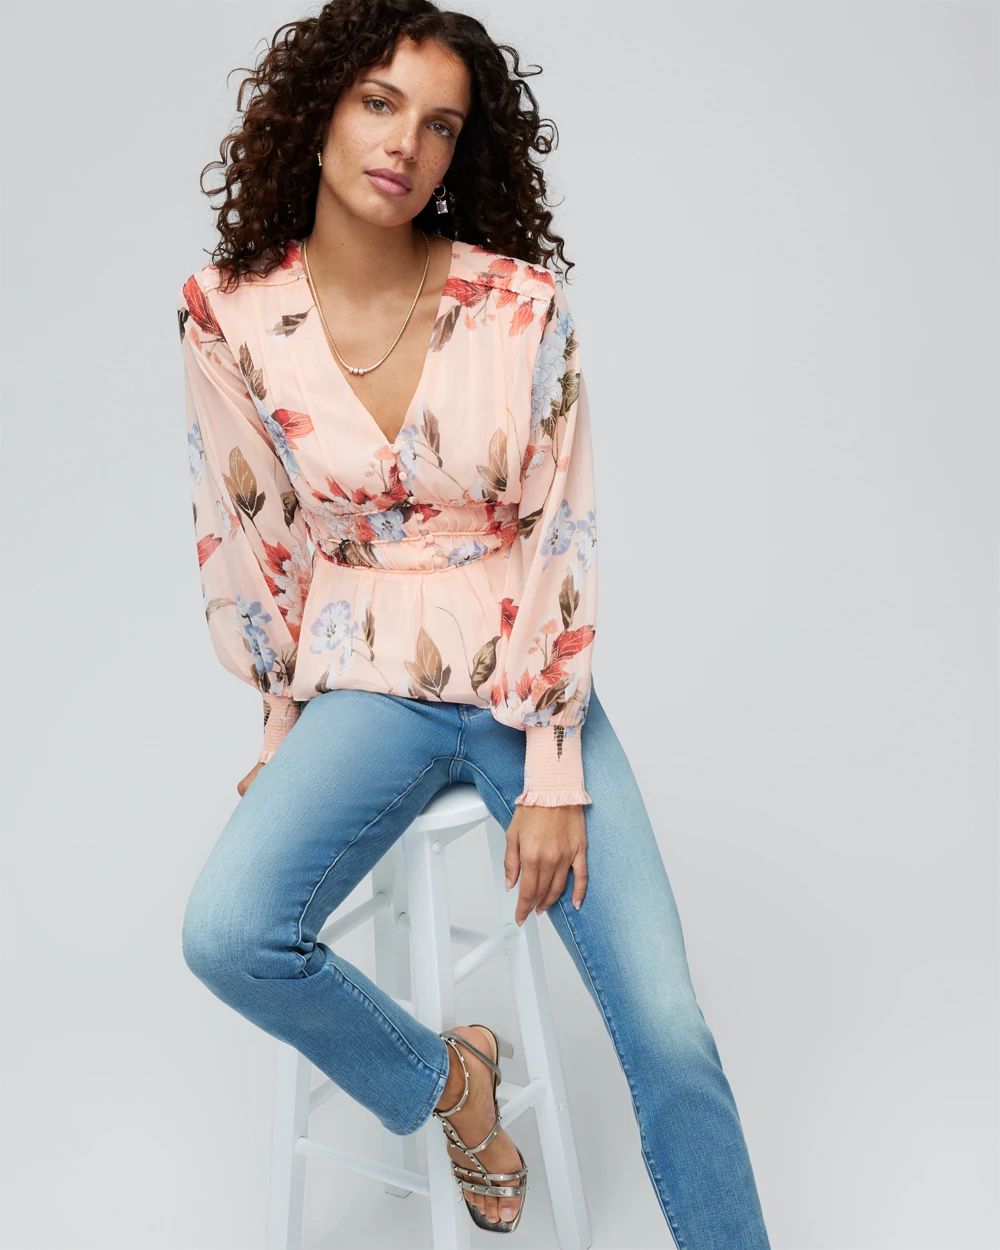 Petite Long Sleeve Romantic Blouse click to view larger image.